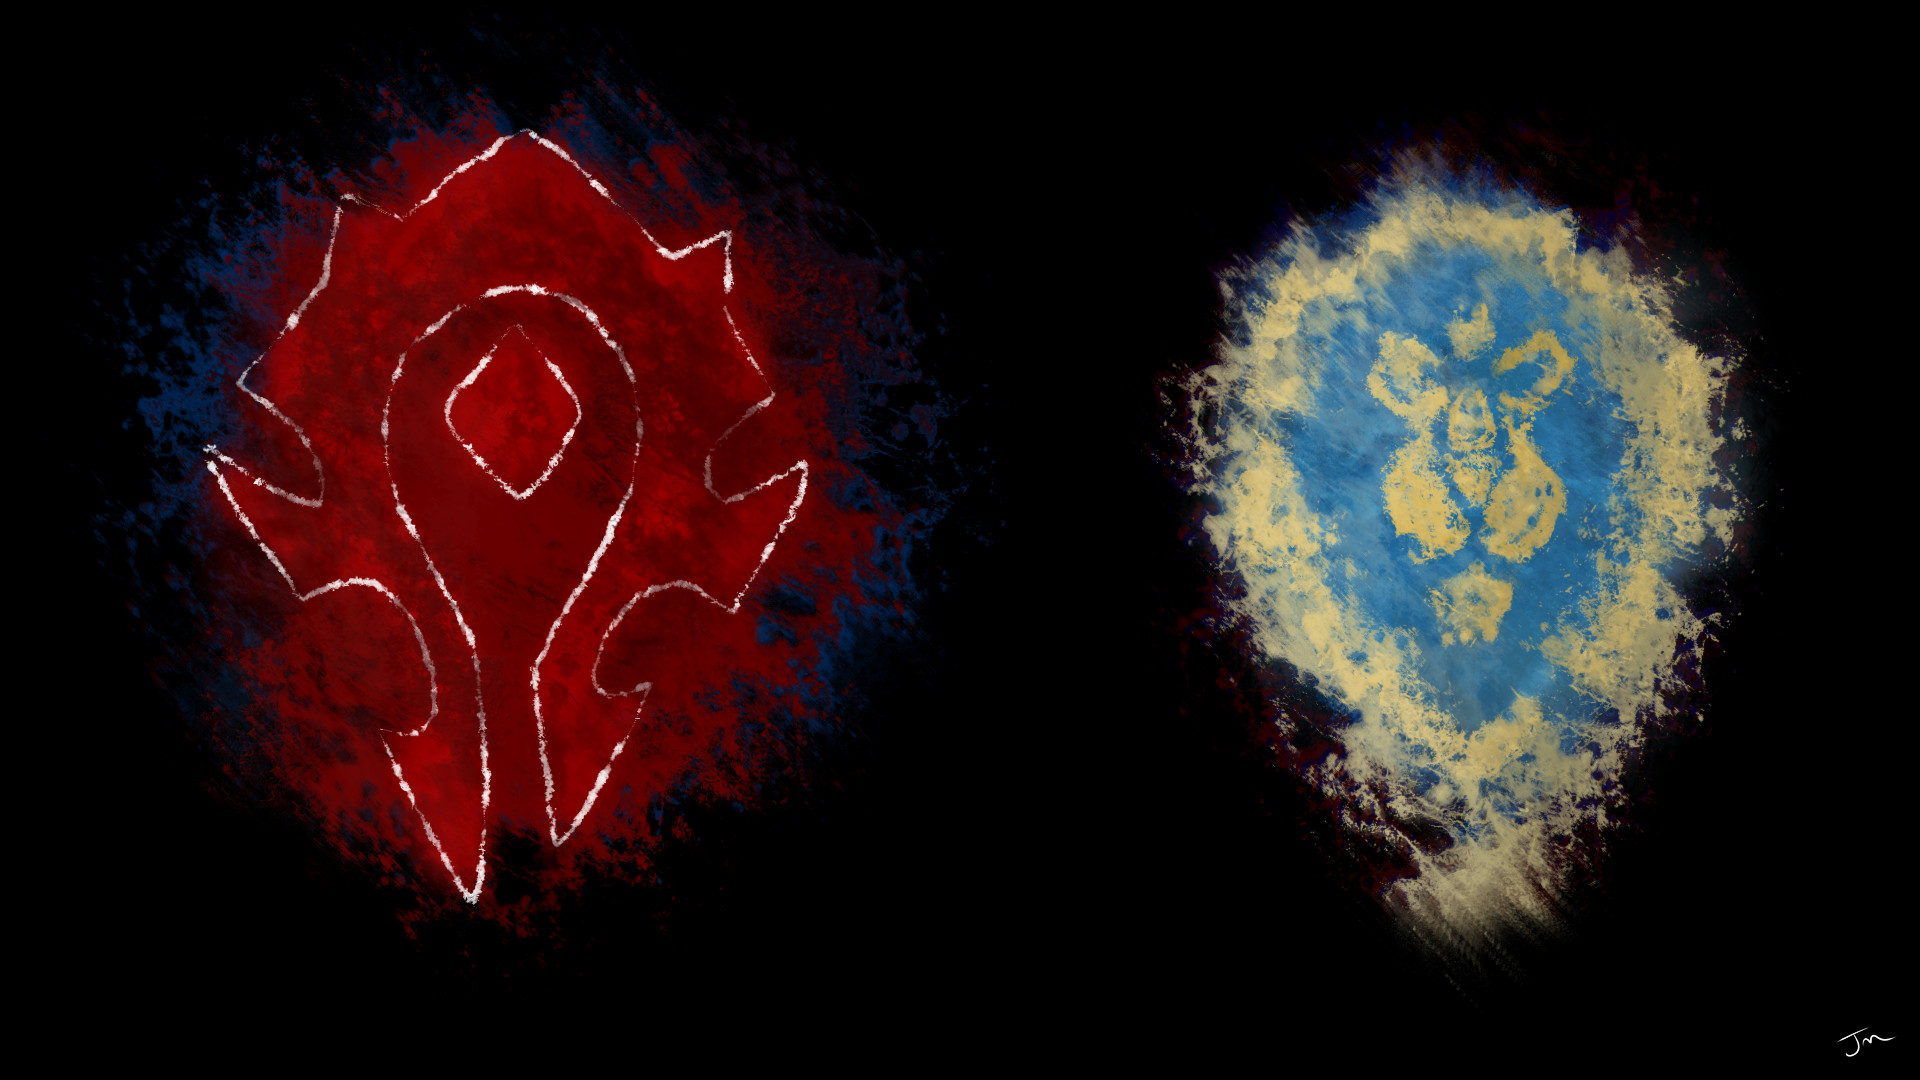 1920x1080 Alliance/Horde wallpaper I made! (1920 x 1080) Need #iPhone #